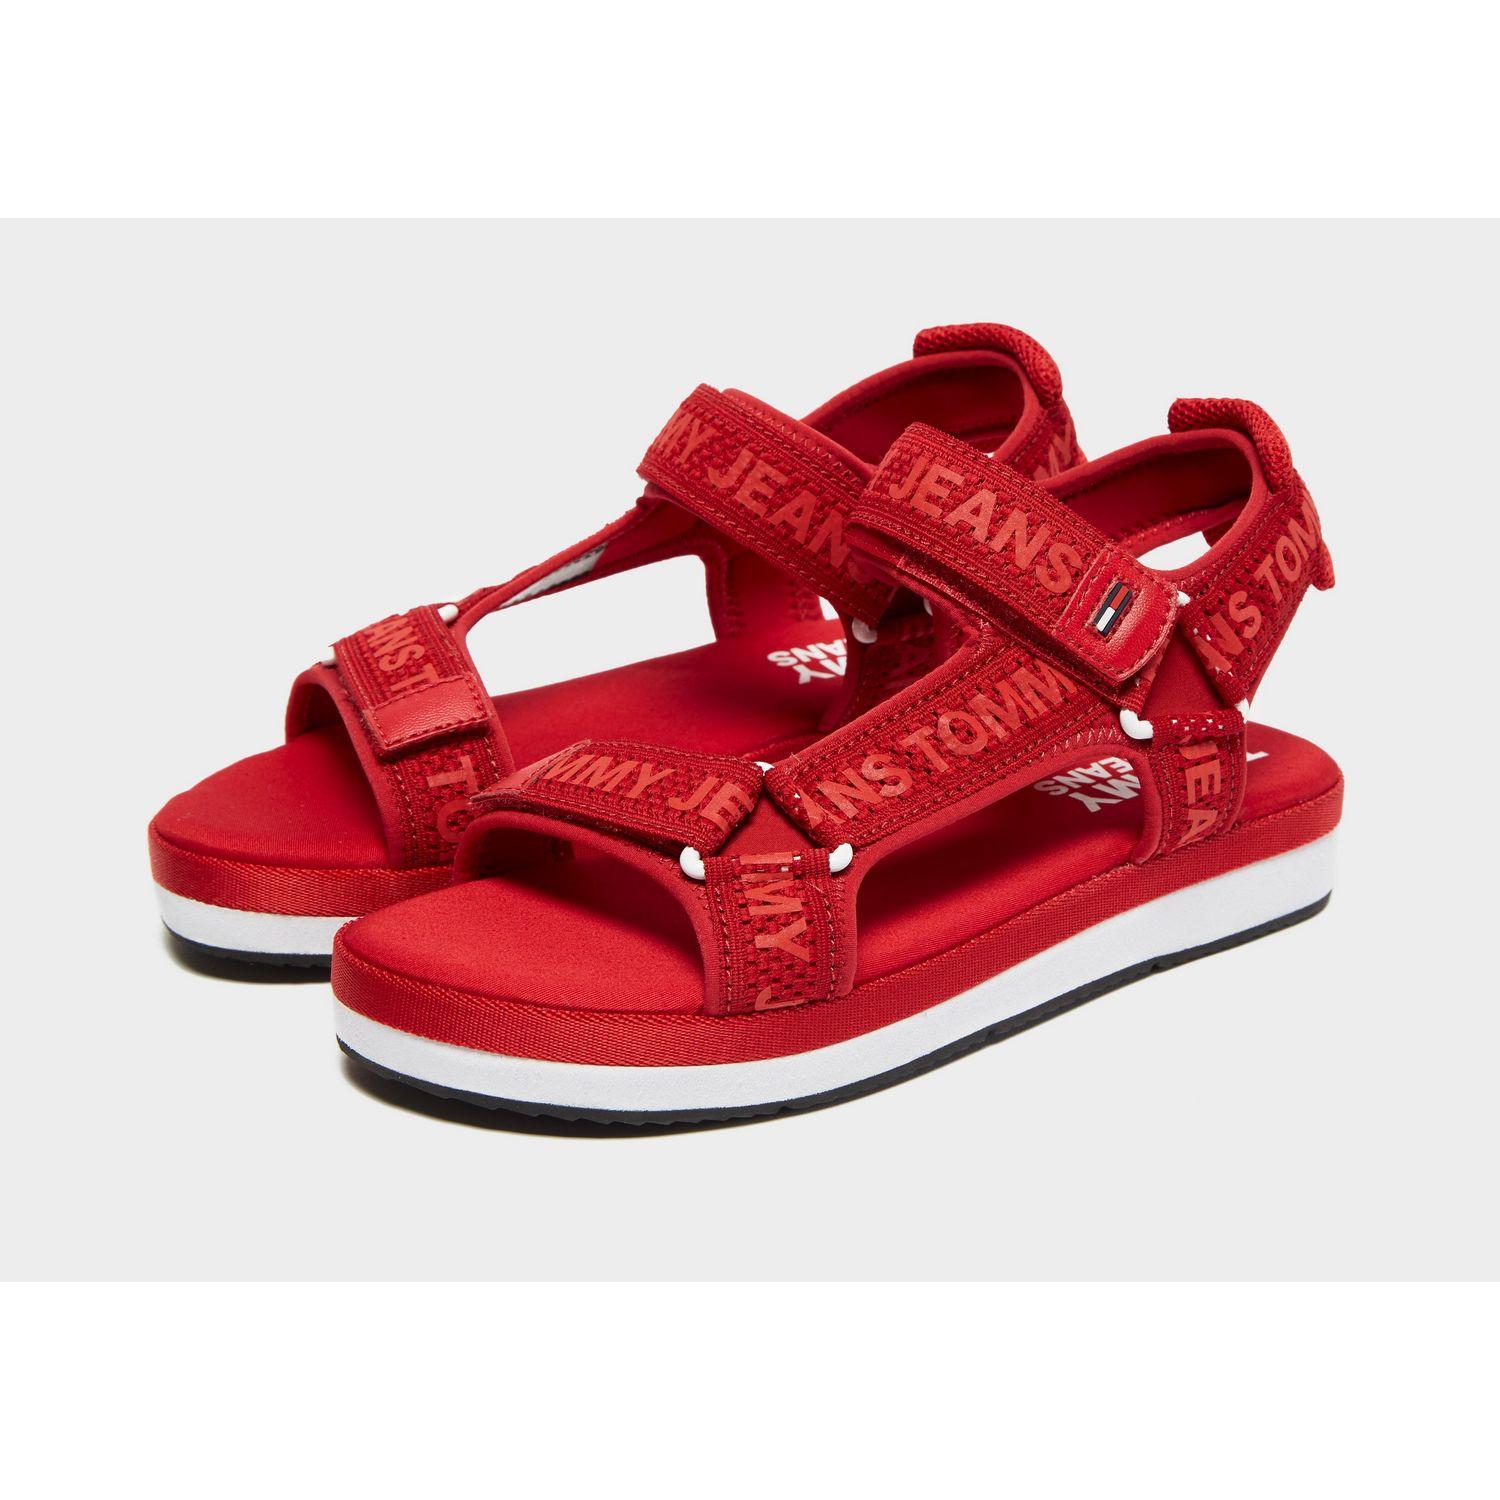 tommy hilfiger sandals with straps